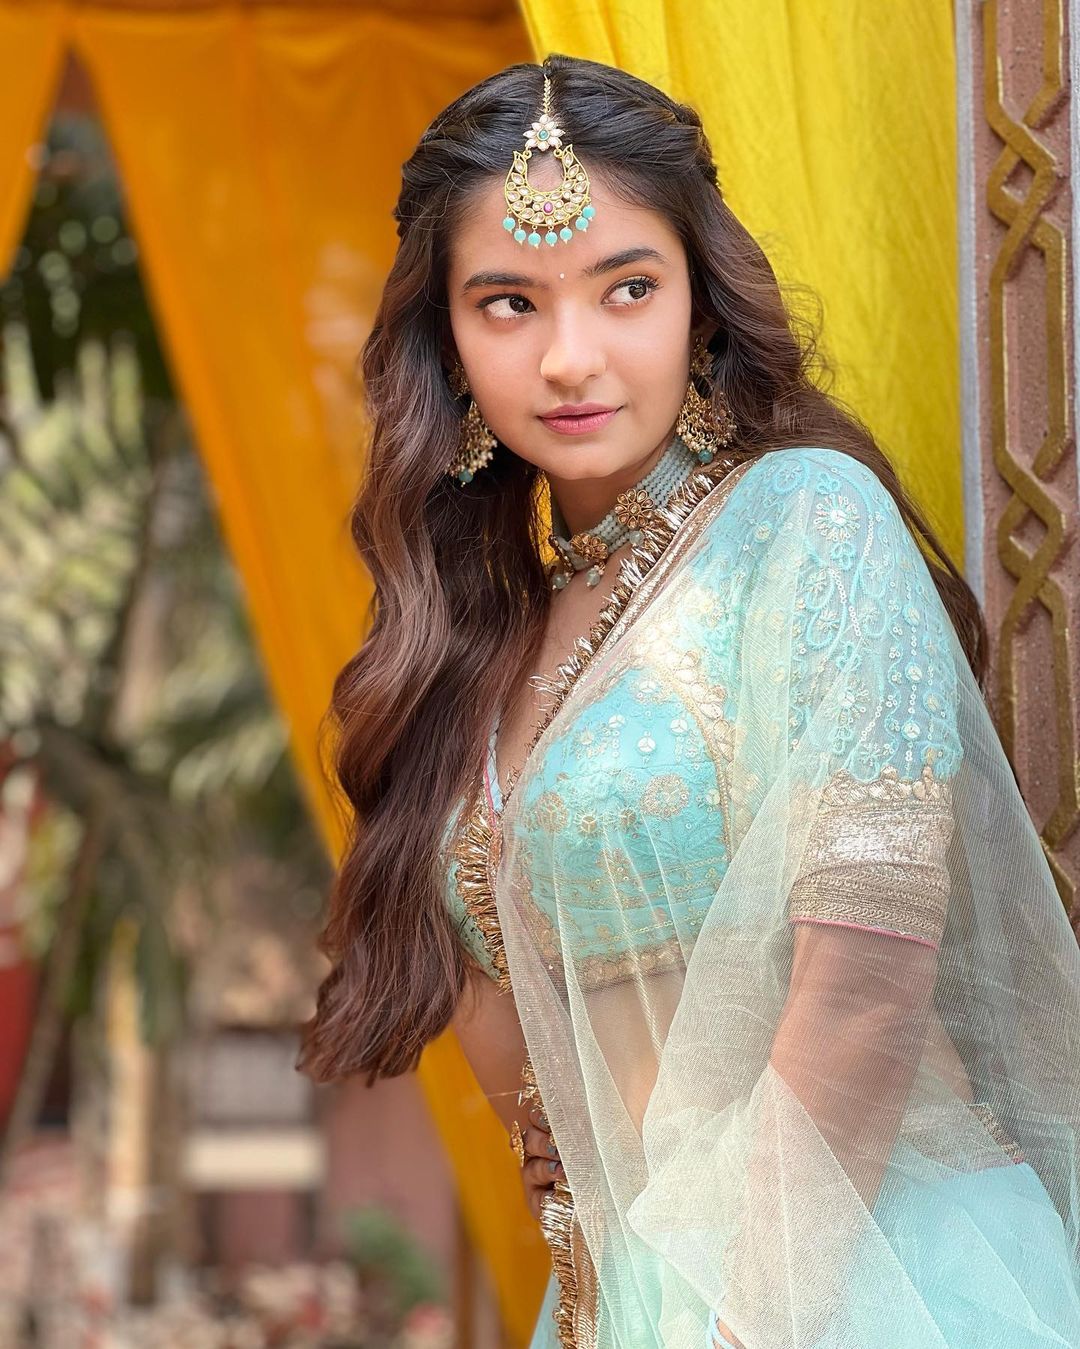 From Anushka Sen, Avneet Kaur to Jannat Zubair Rahmani: The traditional looks of these actresses rocked the hearts of fans 9591